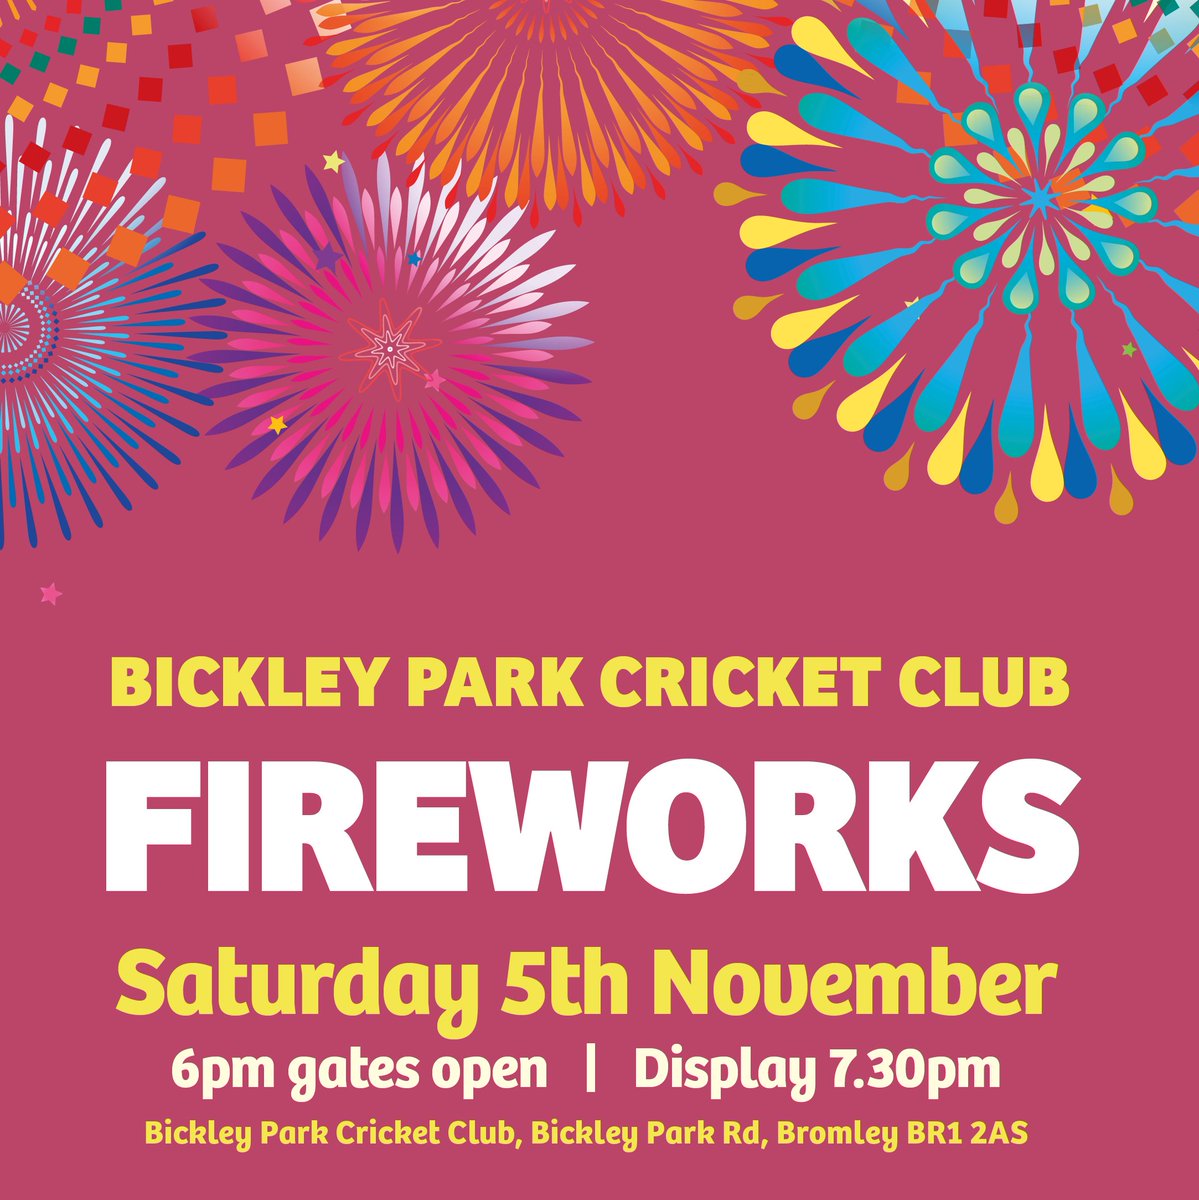 Tonight's Firworks display is STILL ON. Gates open from 6pm Display at 7.30pm Tickets available at the door and online at: tickets.bickleypark.co.uk/events/firewor…